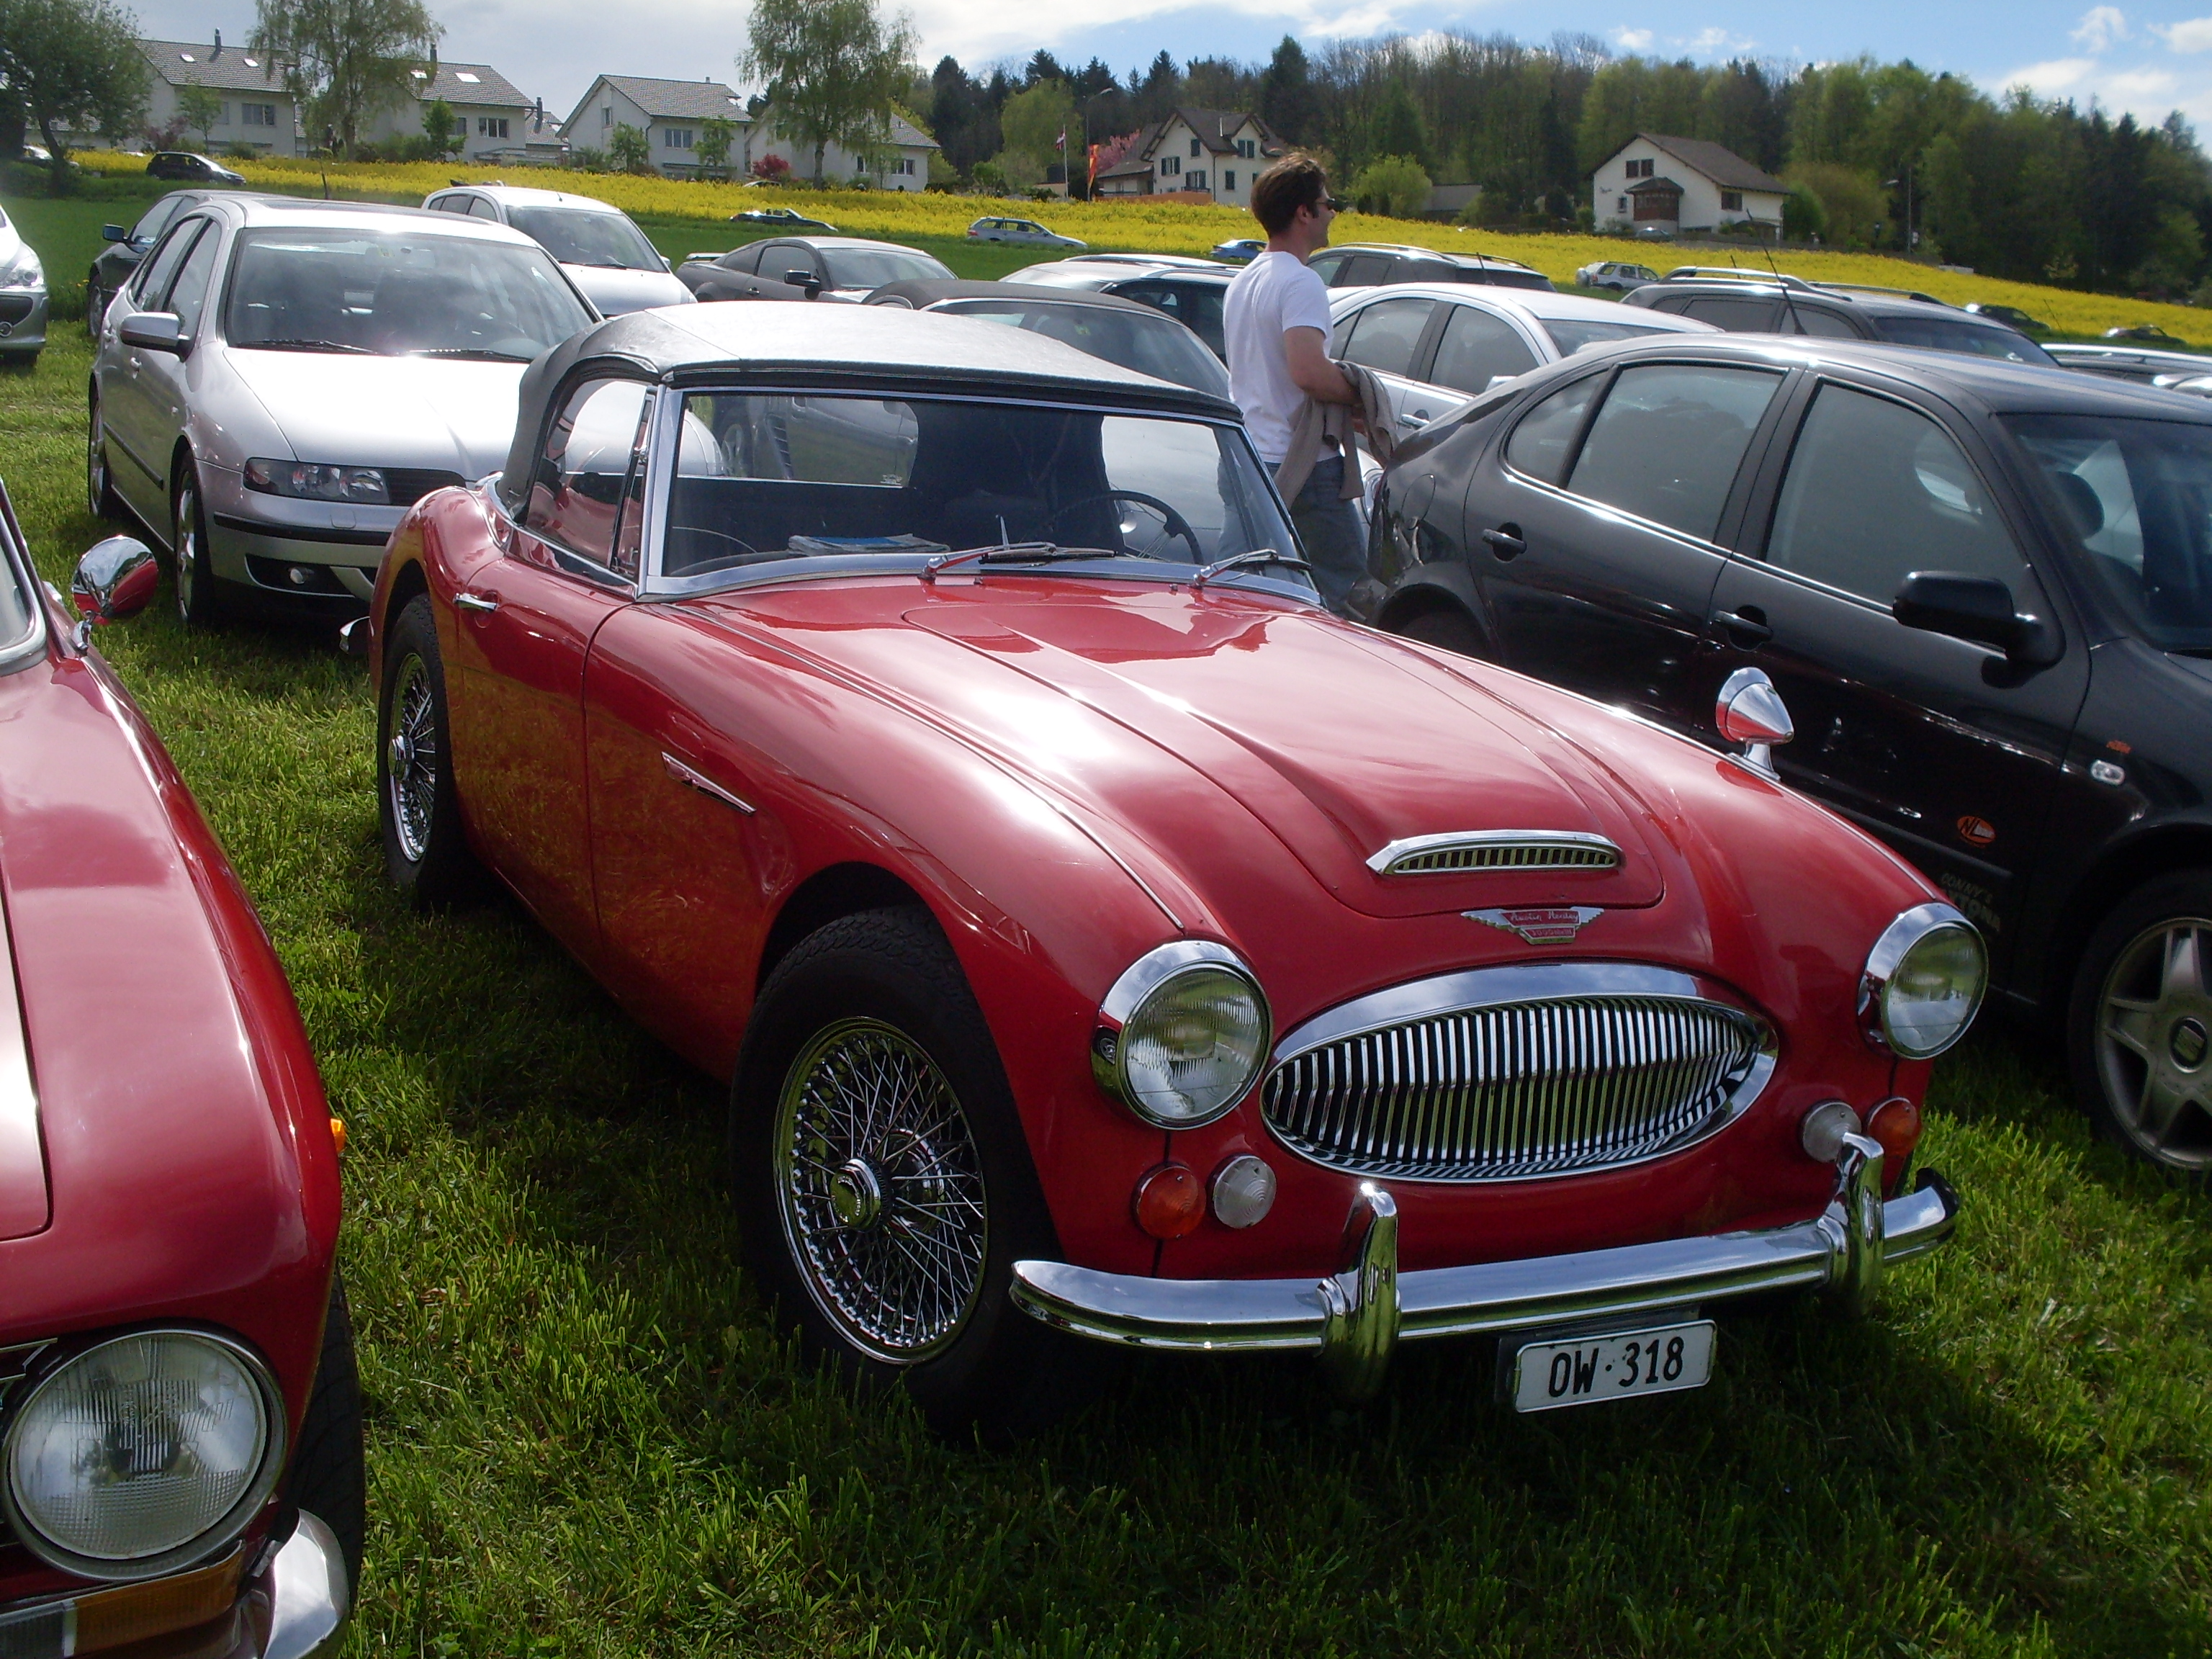 Austin-Healey 3000 Mk III 1964-1967 (1965-1967), right front view